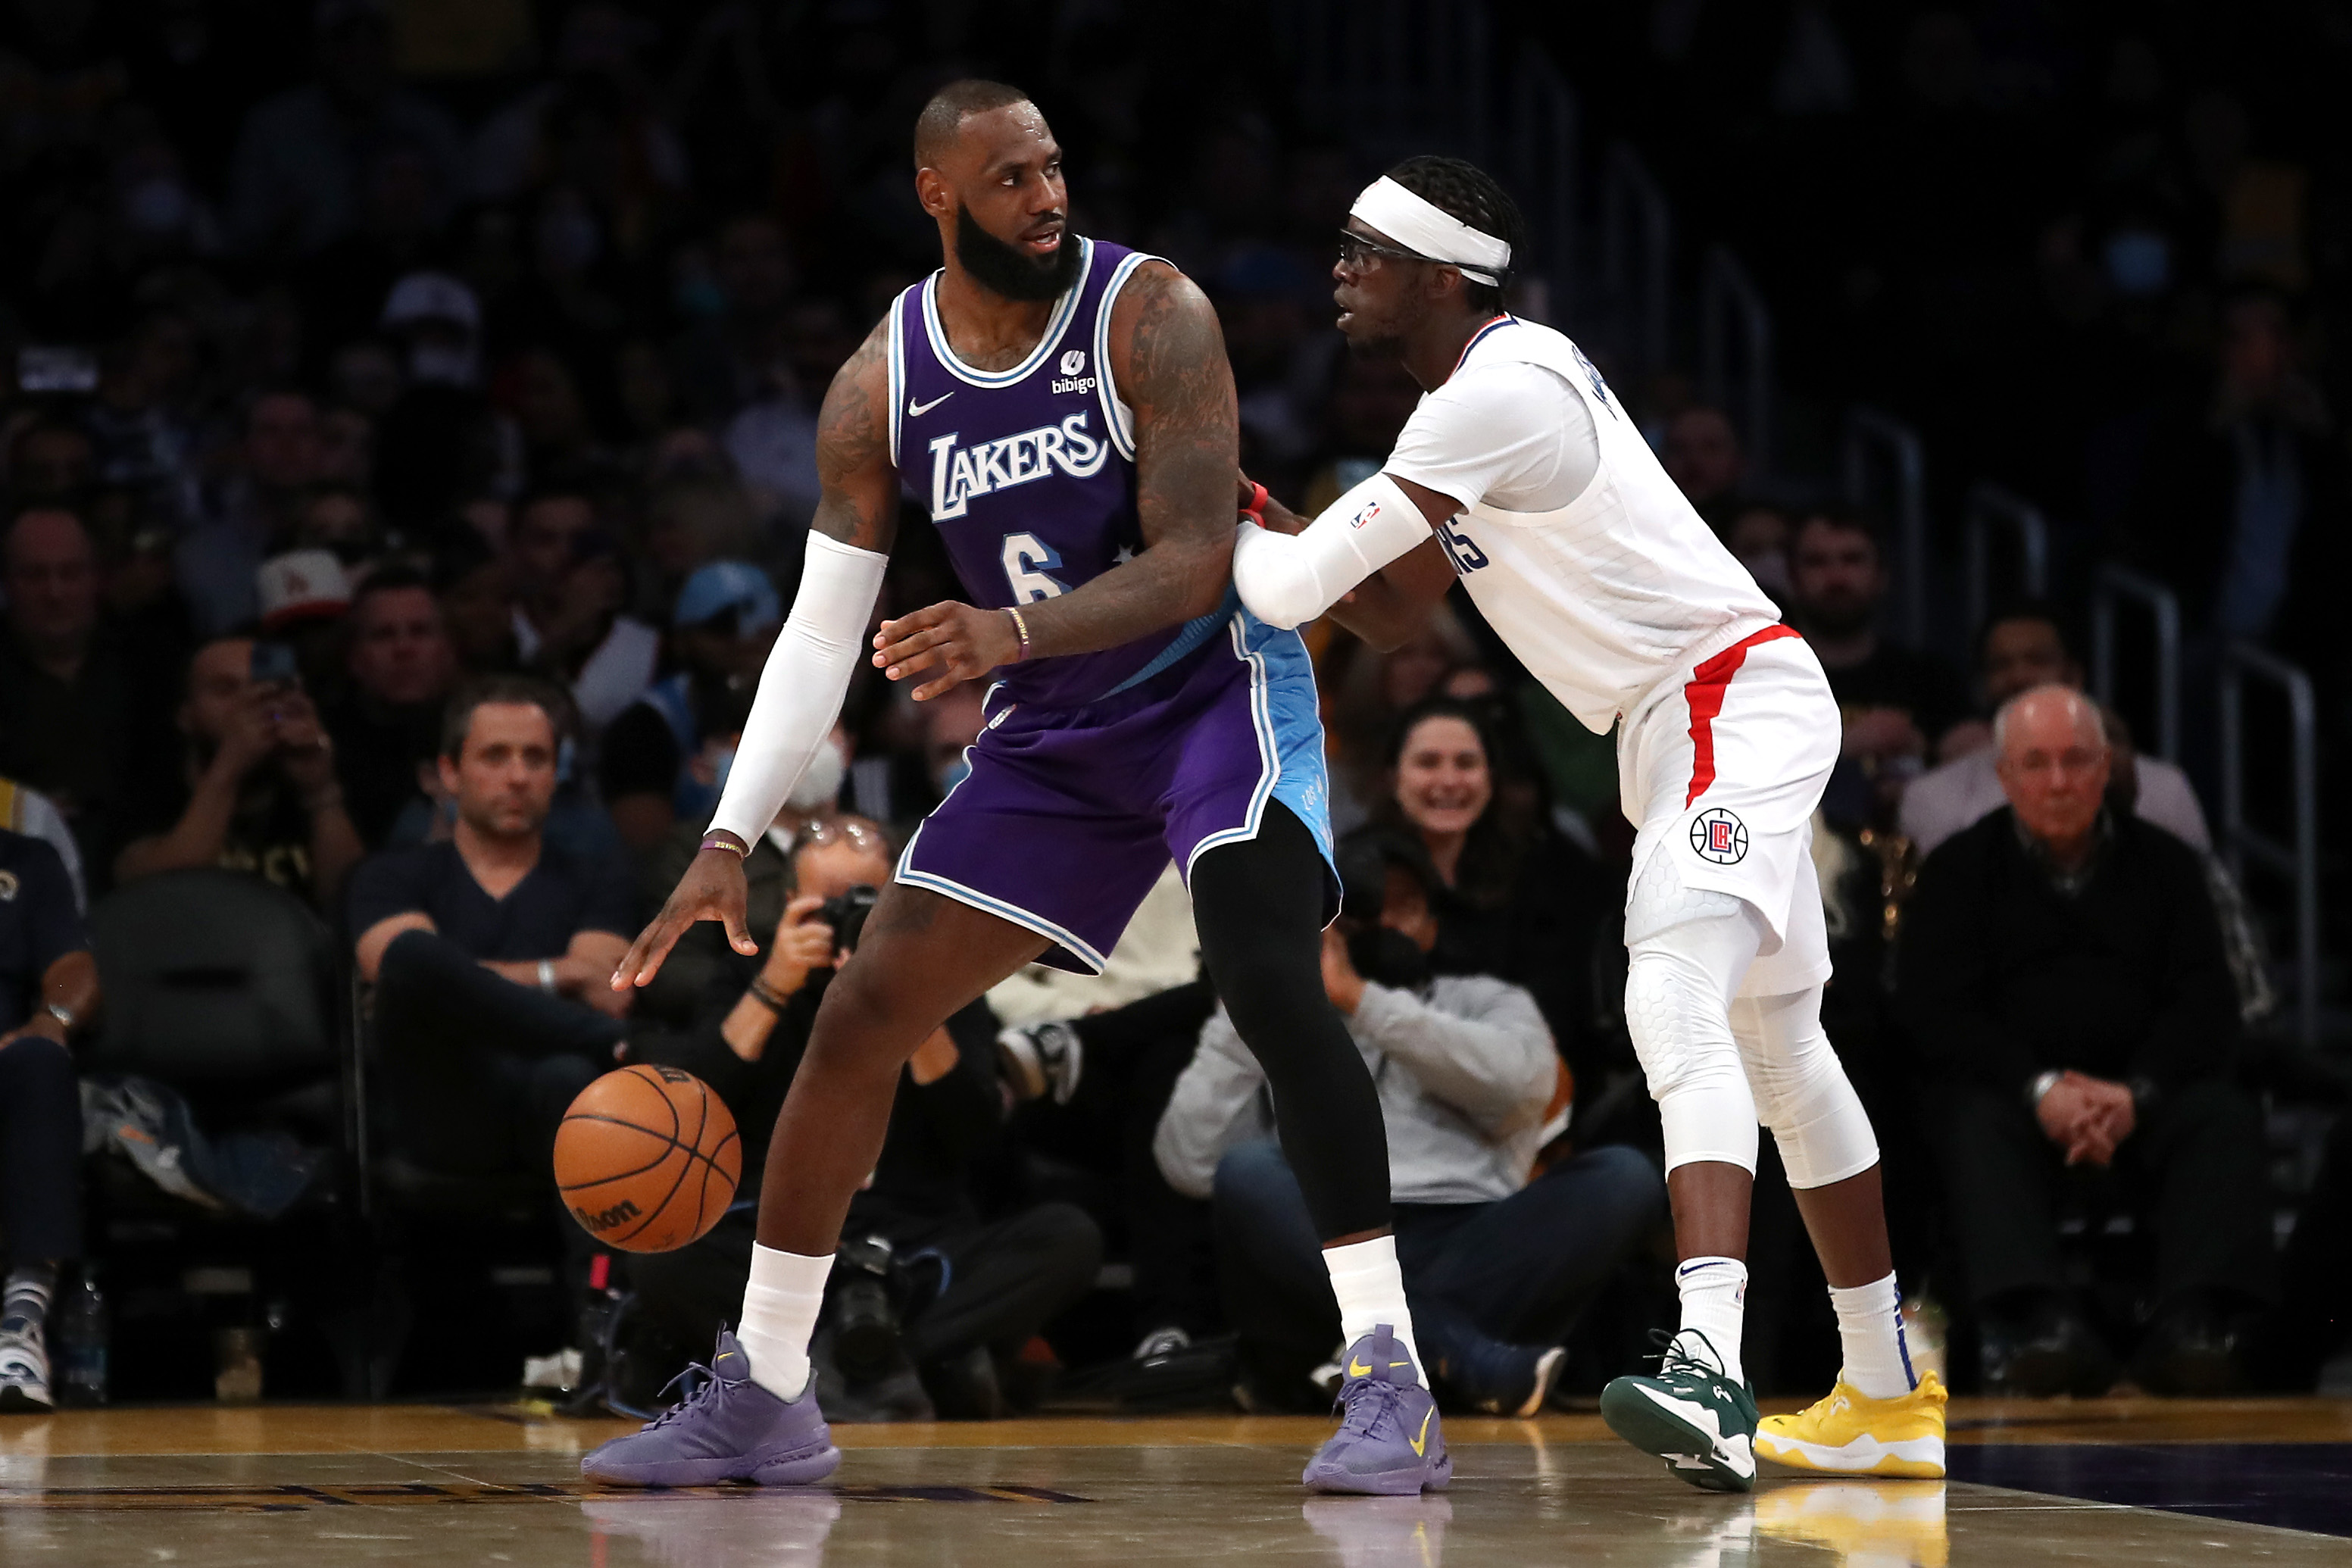 Los Angeles Lakers forward LeBron James backs down LA Clippers guard Reggie Jackson during a game in February 2022